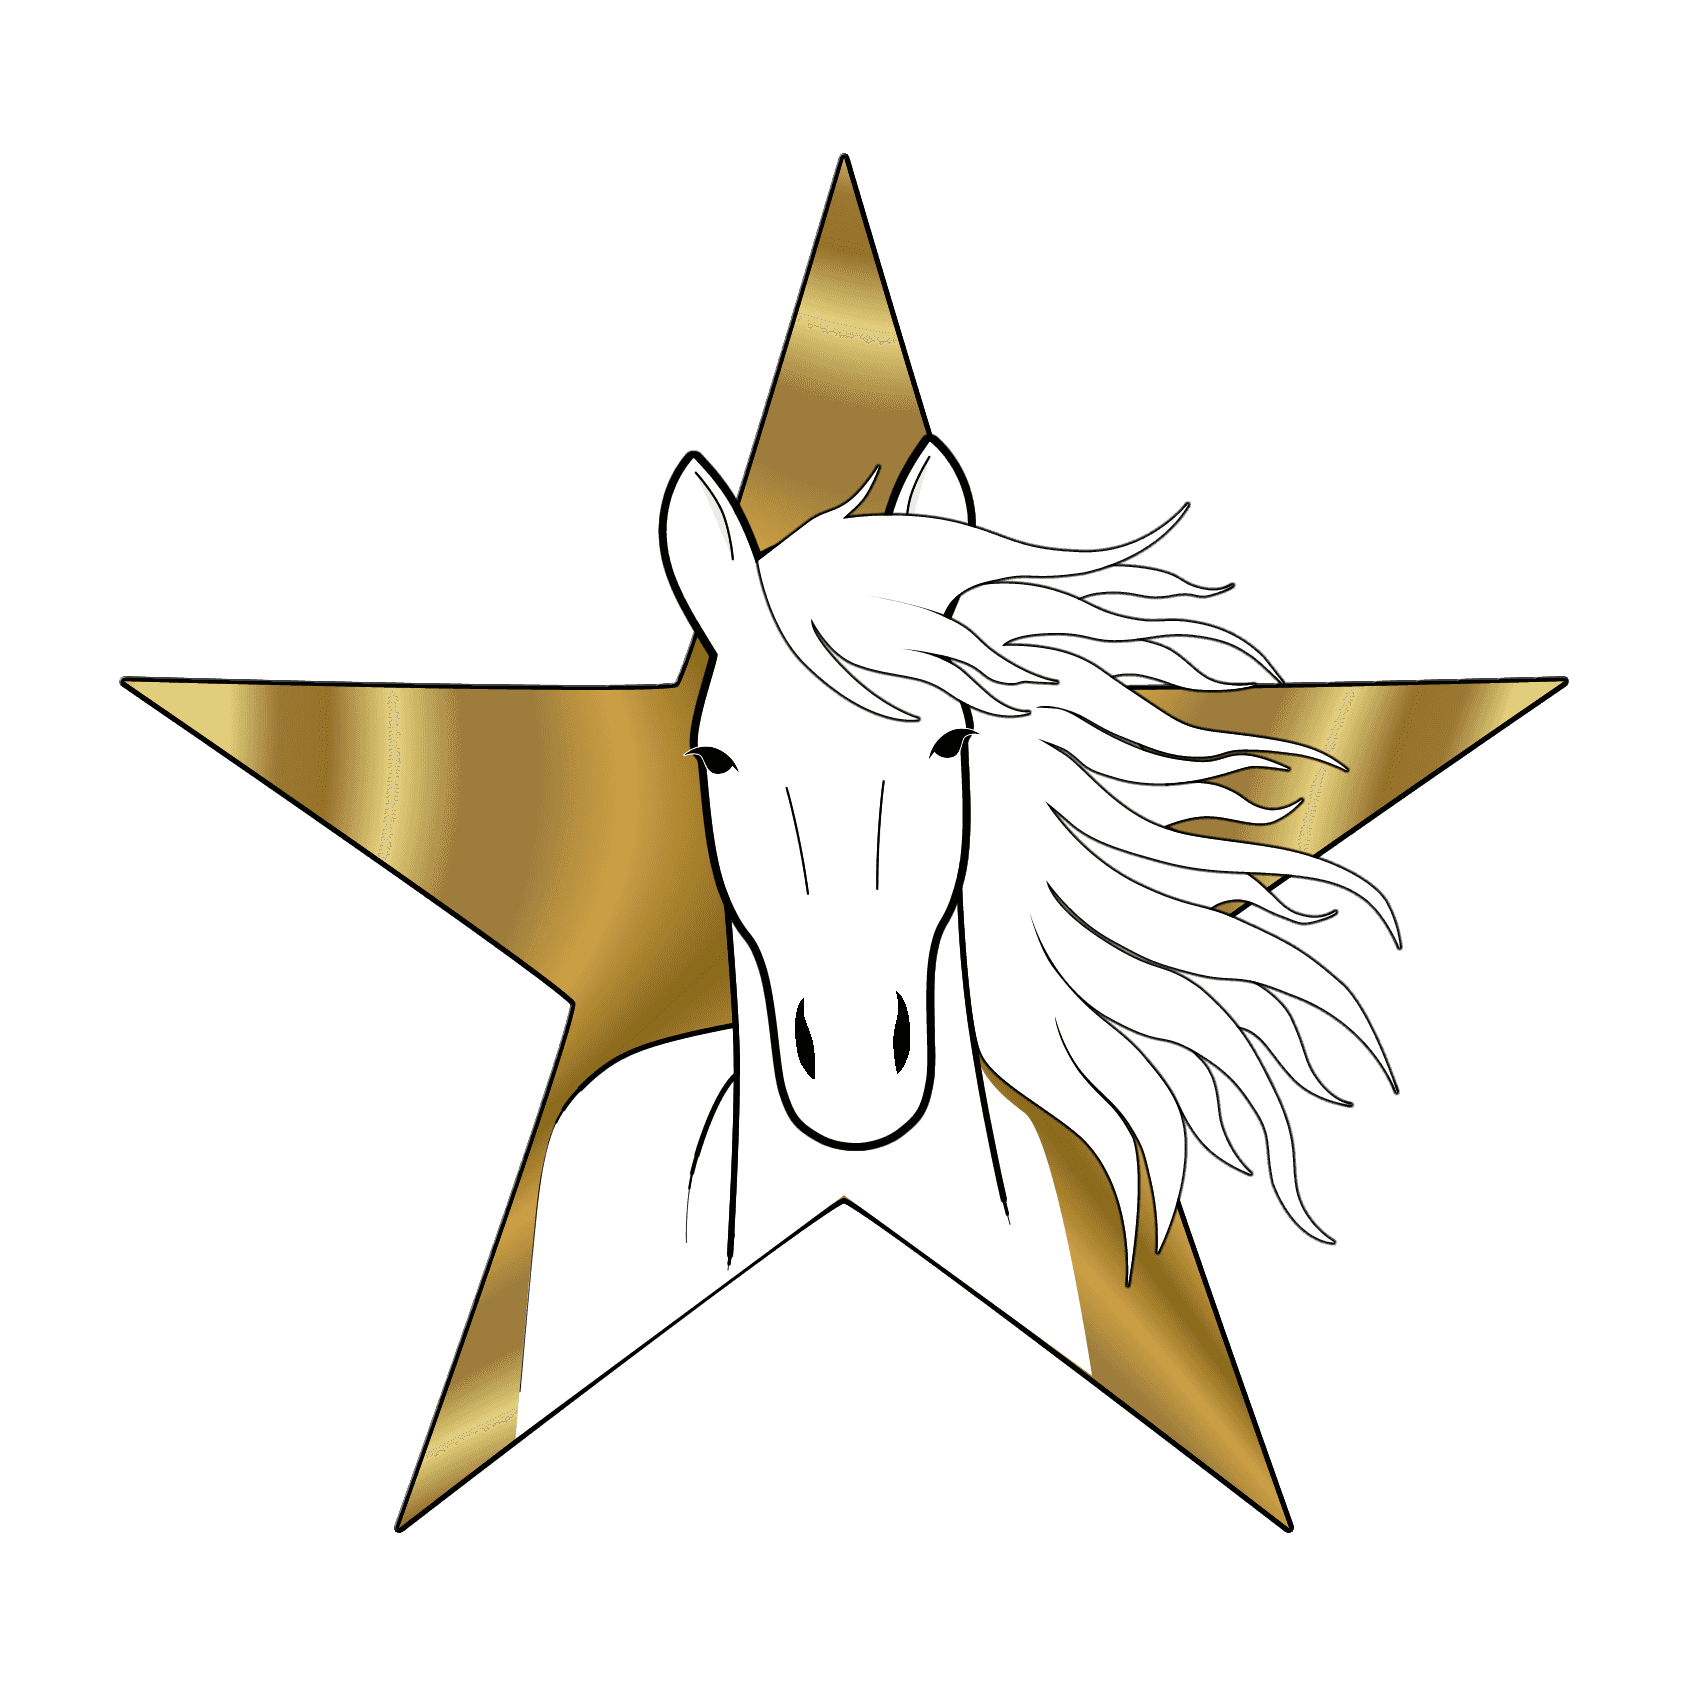 Save Them All Horse Rescue Inc.'s Logo